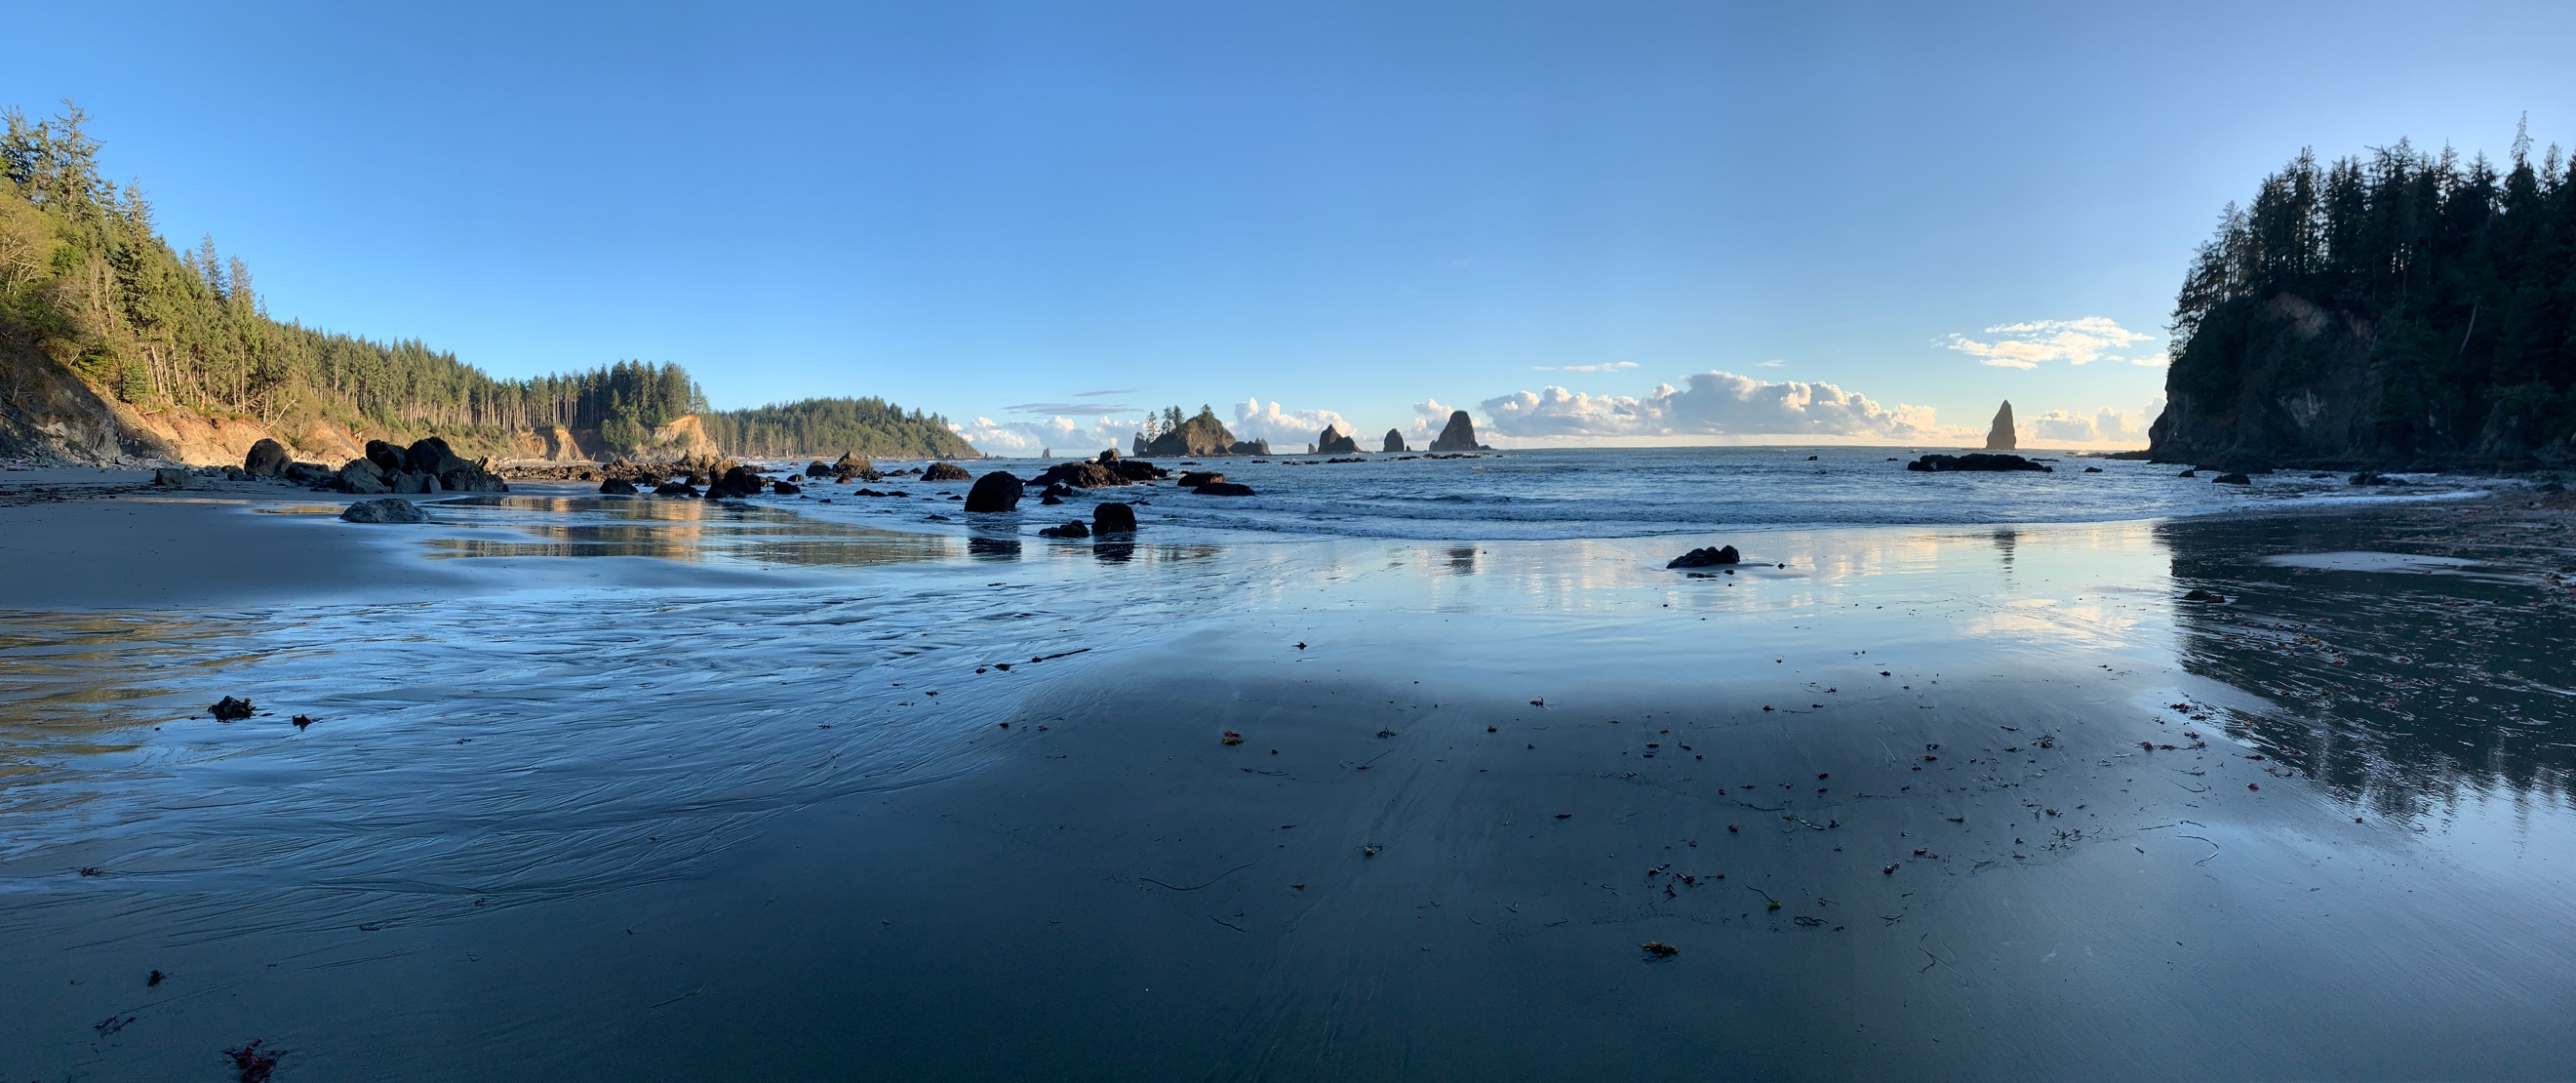 Panoramic shot of Olympic Coast South Trail.